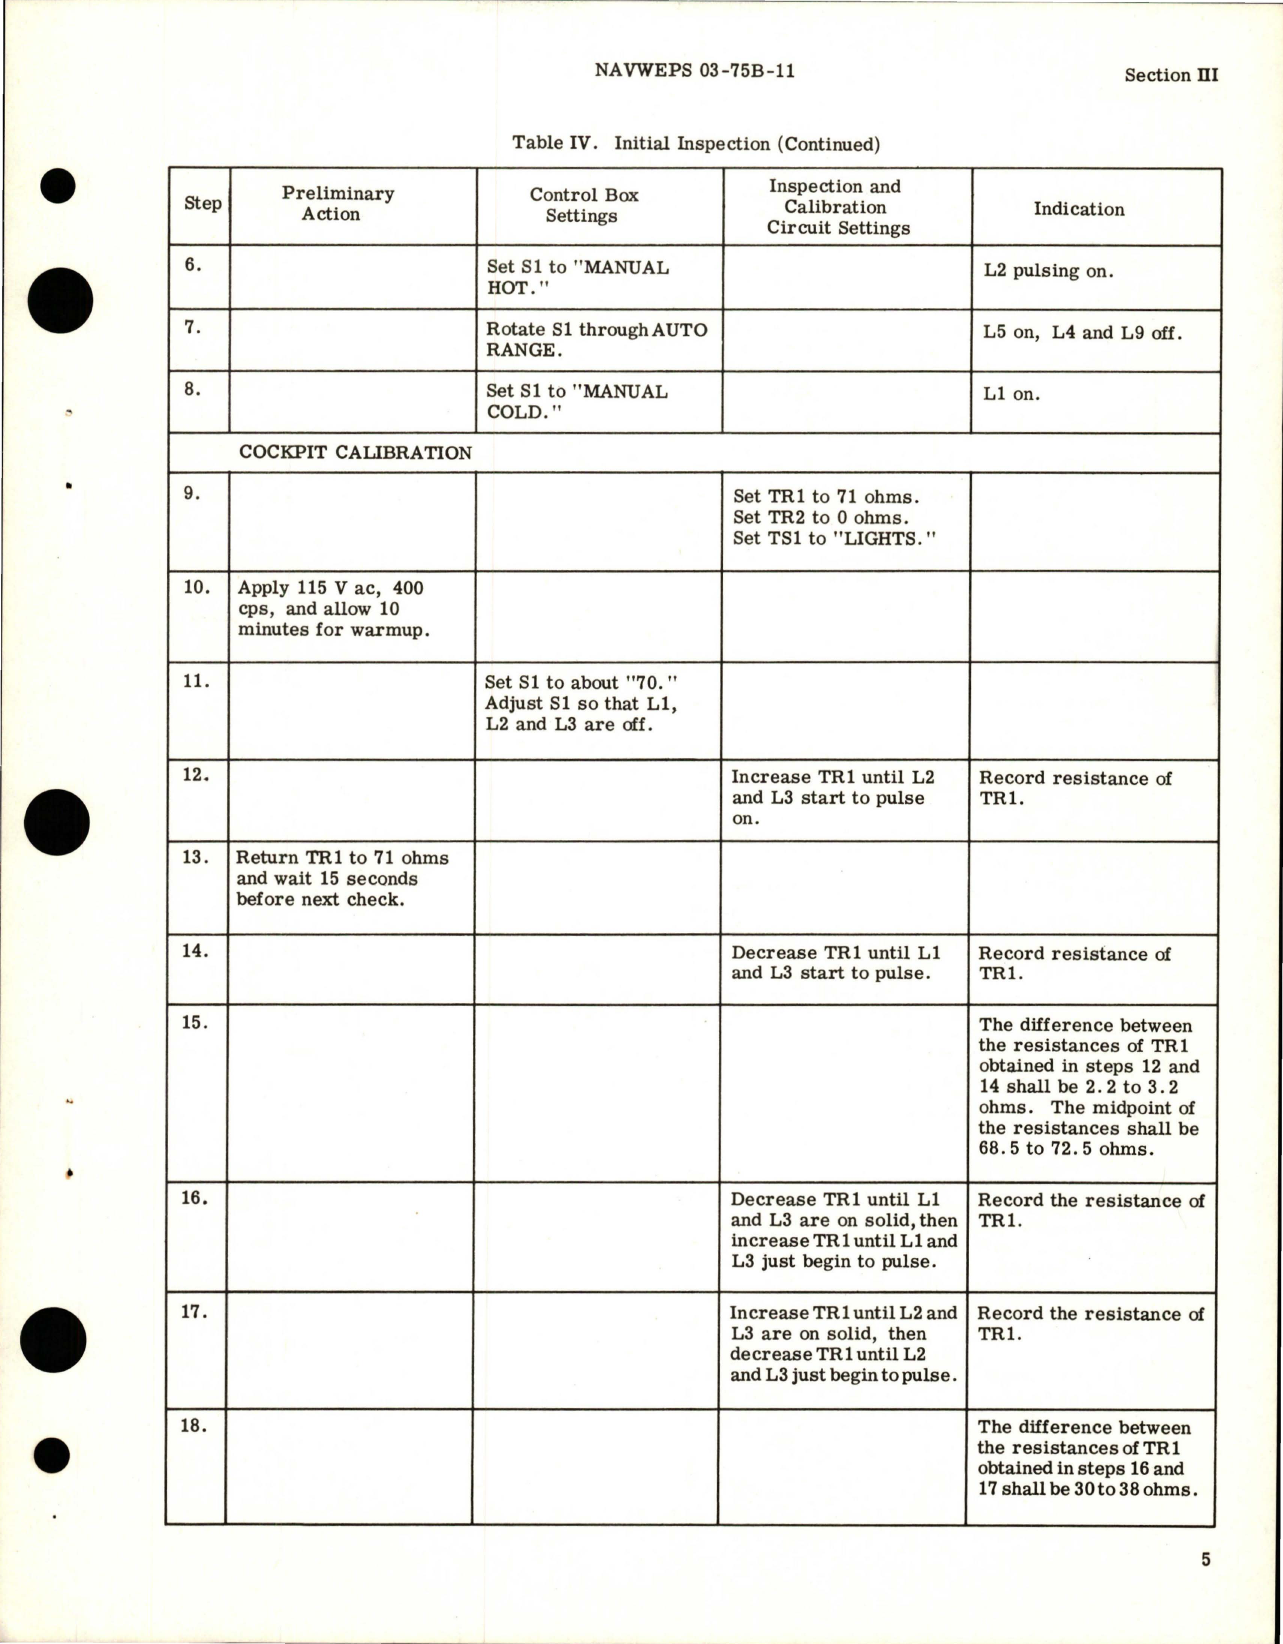 Sample page 5 from AirCorps Library document: Overhaul Instructions for Electronic Cockpit Temperature Control - Part CYLZ 5480-3